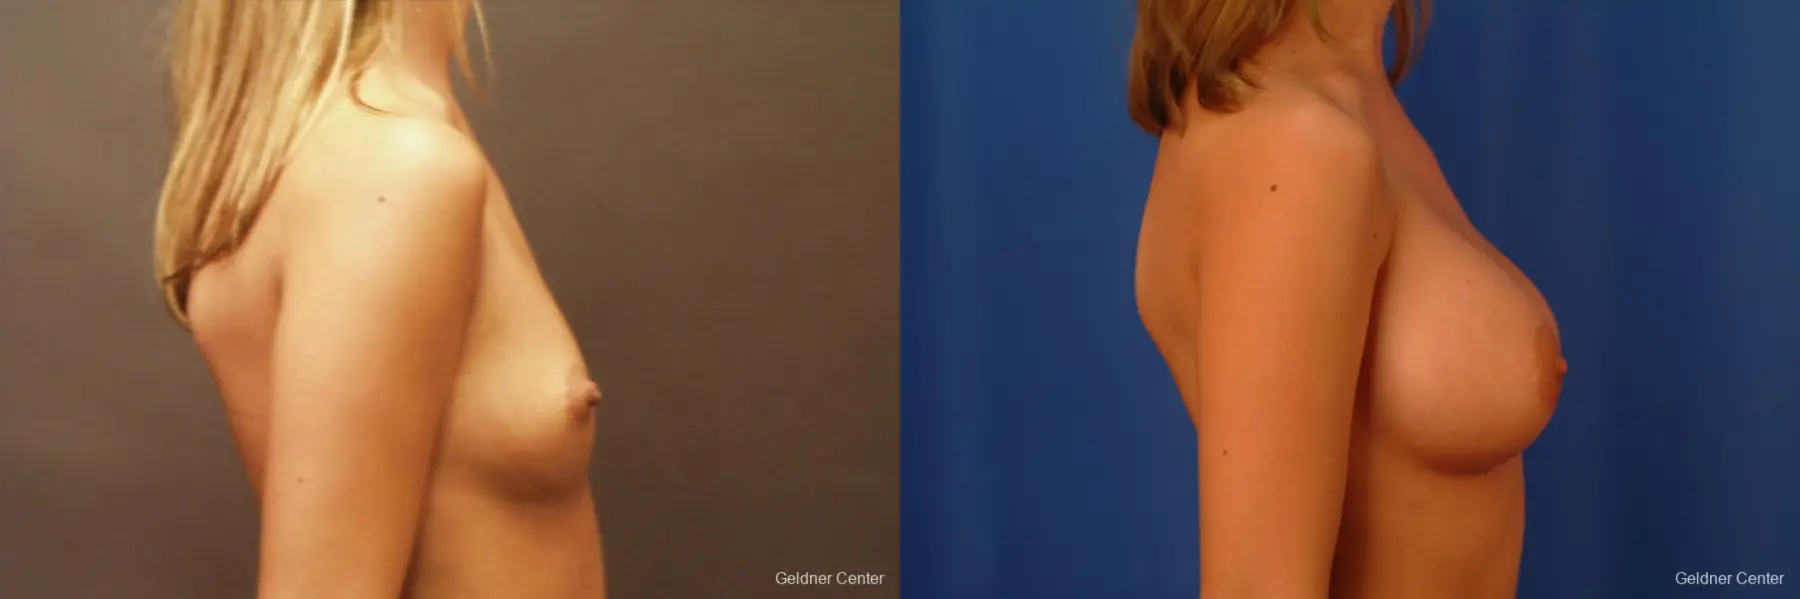 Breast Augmentation Lake Shore Dr, Chicago 2533 - Before and After 2